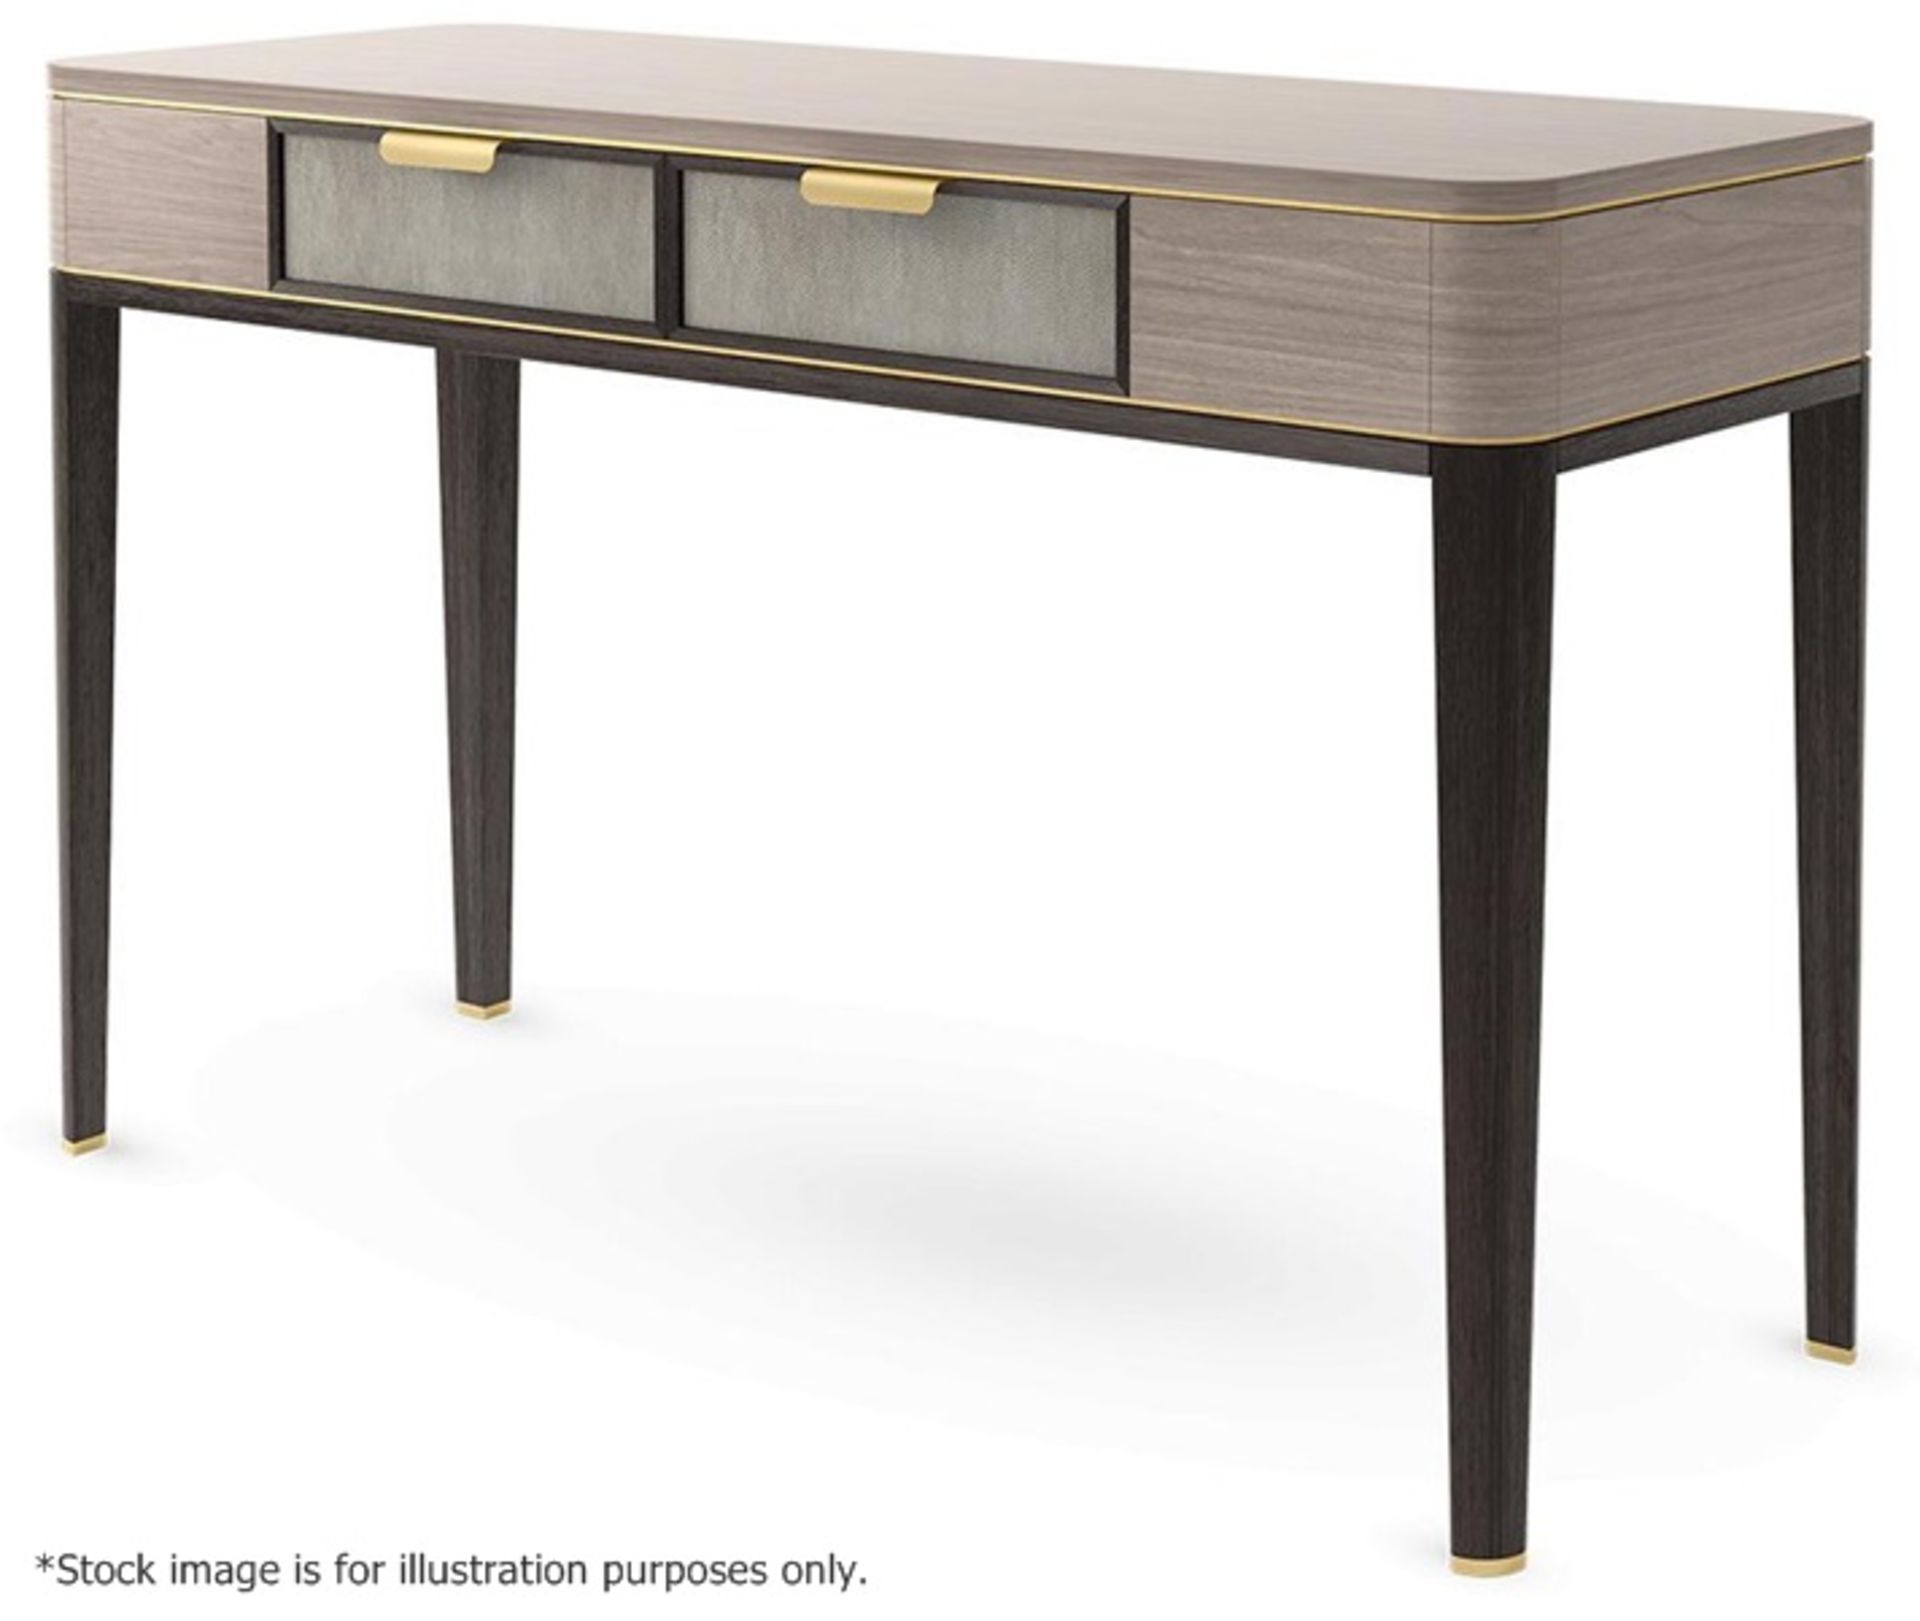 1 x FRATO 'Mandalay' Luxury Designer 2-Drawer Dresser Dressing Table In A Gloss Finish - RRP £4,300 - Image 4 of 17